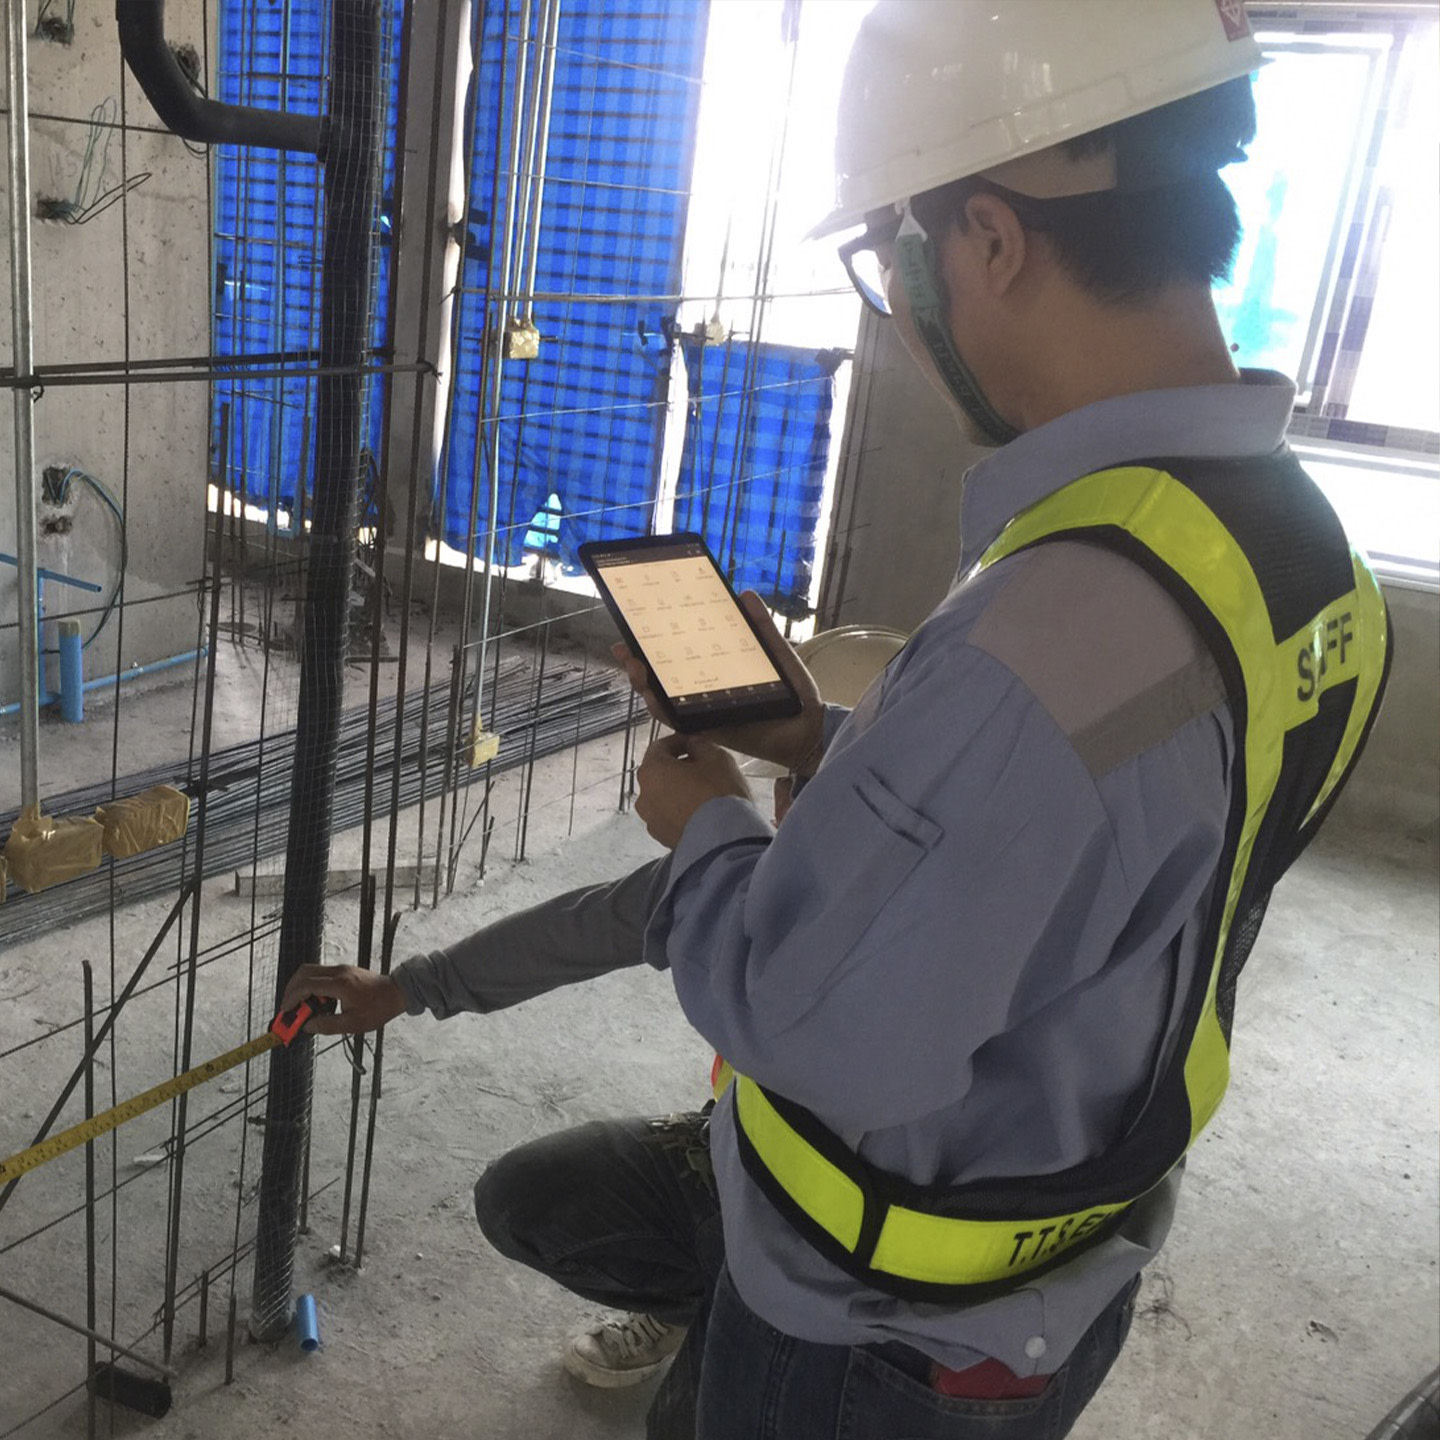 Contractor using an ipad while another contractor is taking measures